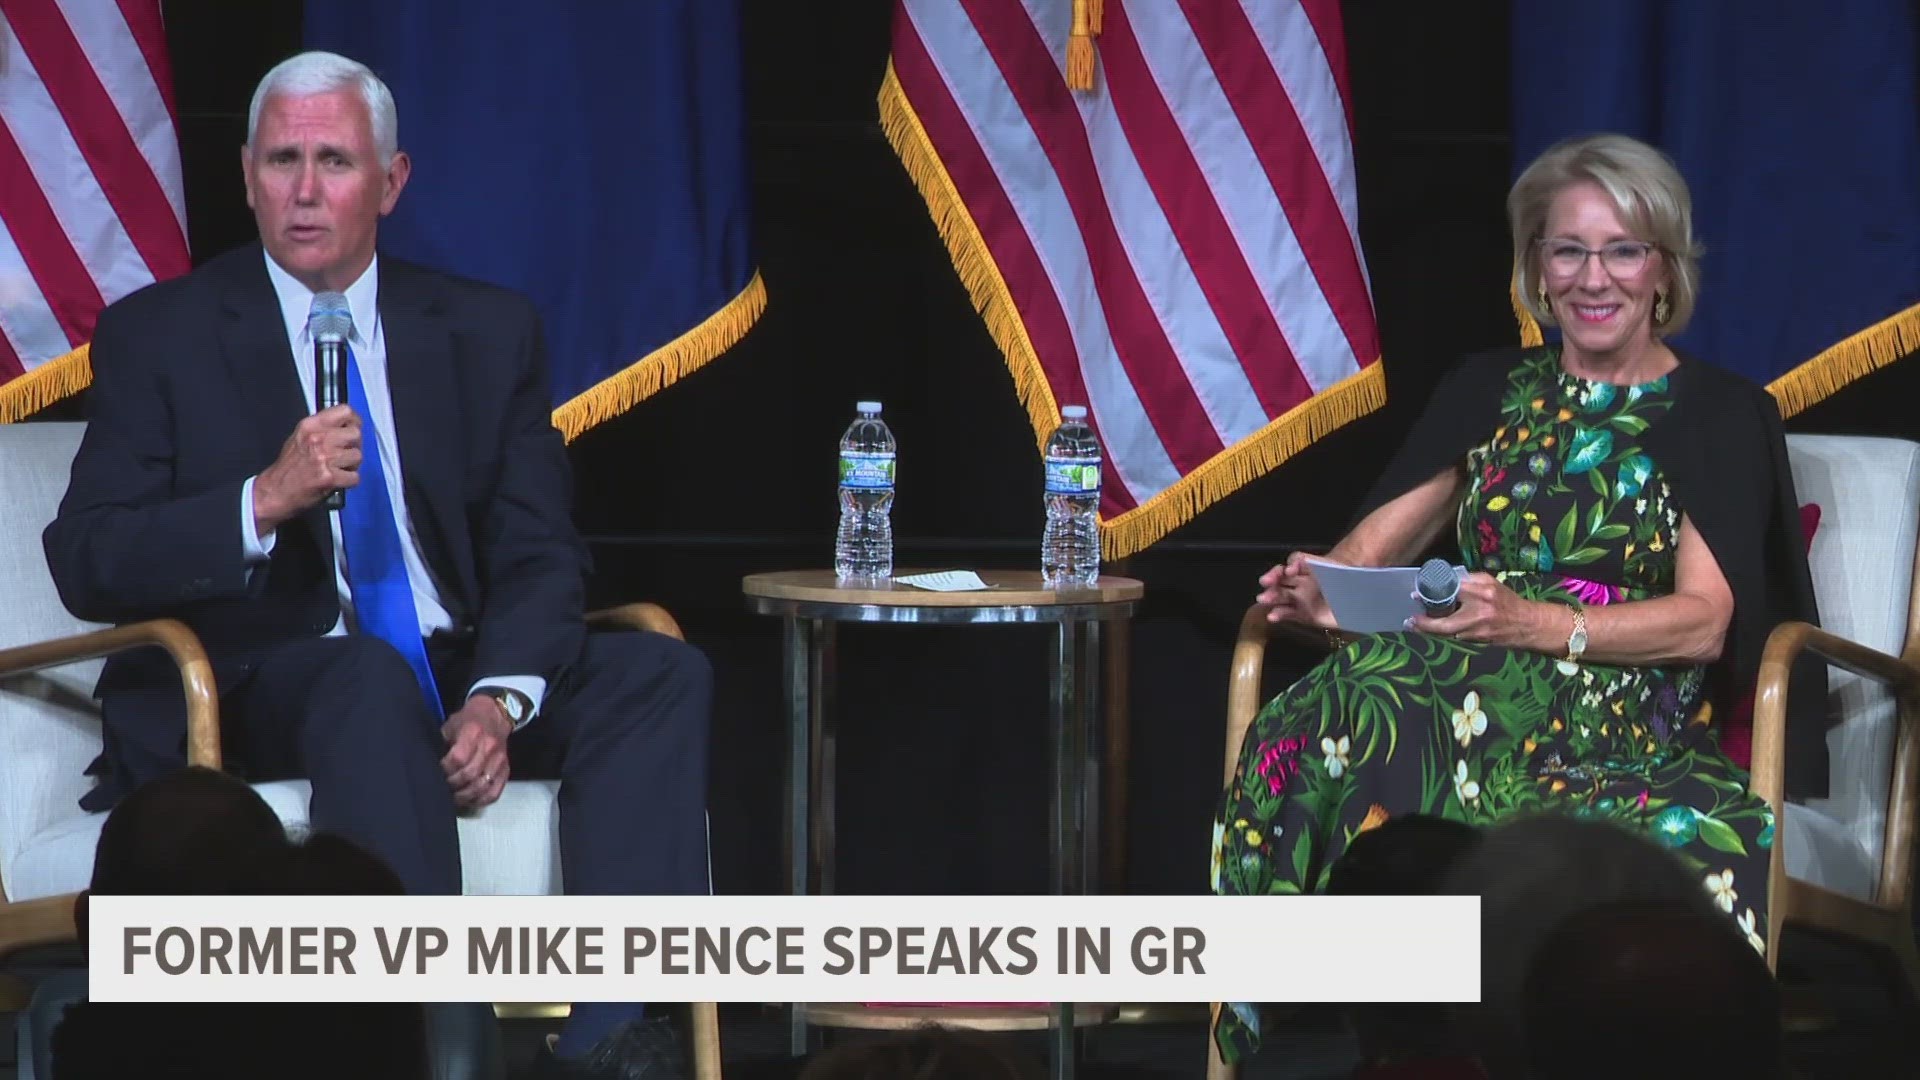 The former vice president was joined by former U.S. Secretary of Education Betsy DeVos for an event hosted by the Kirk Center.